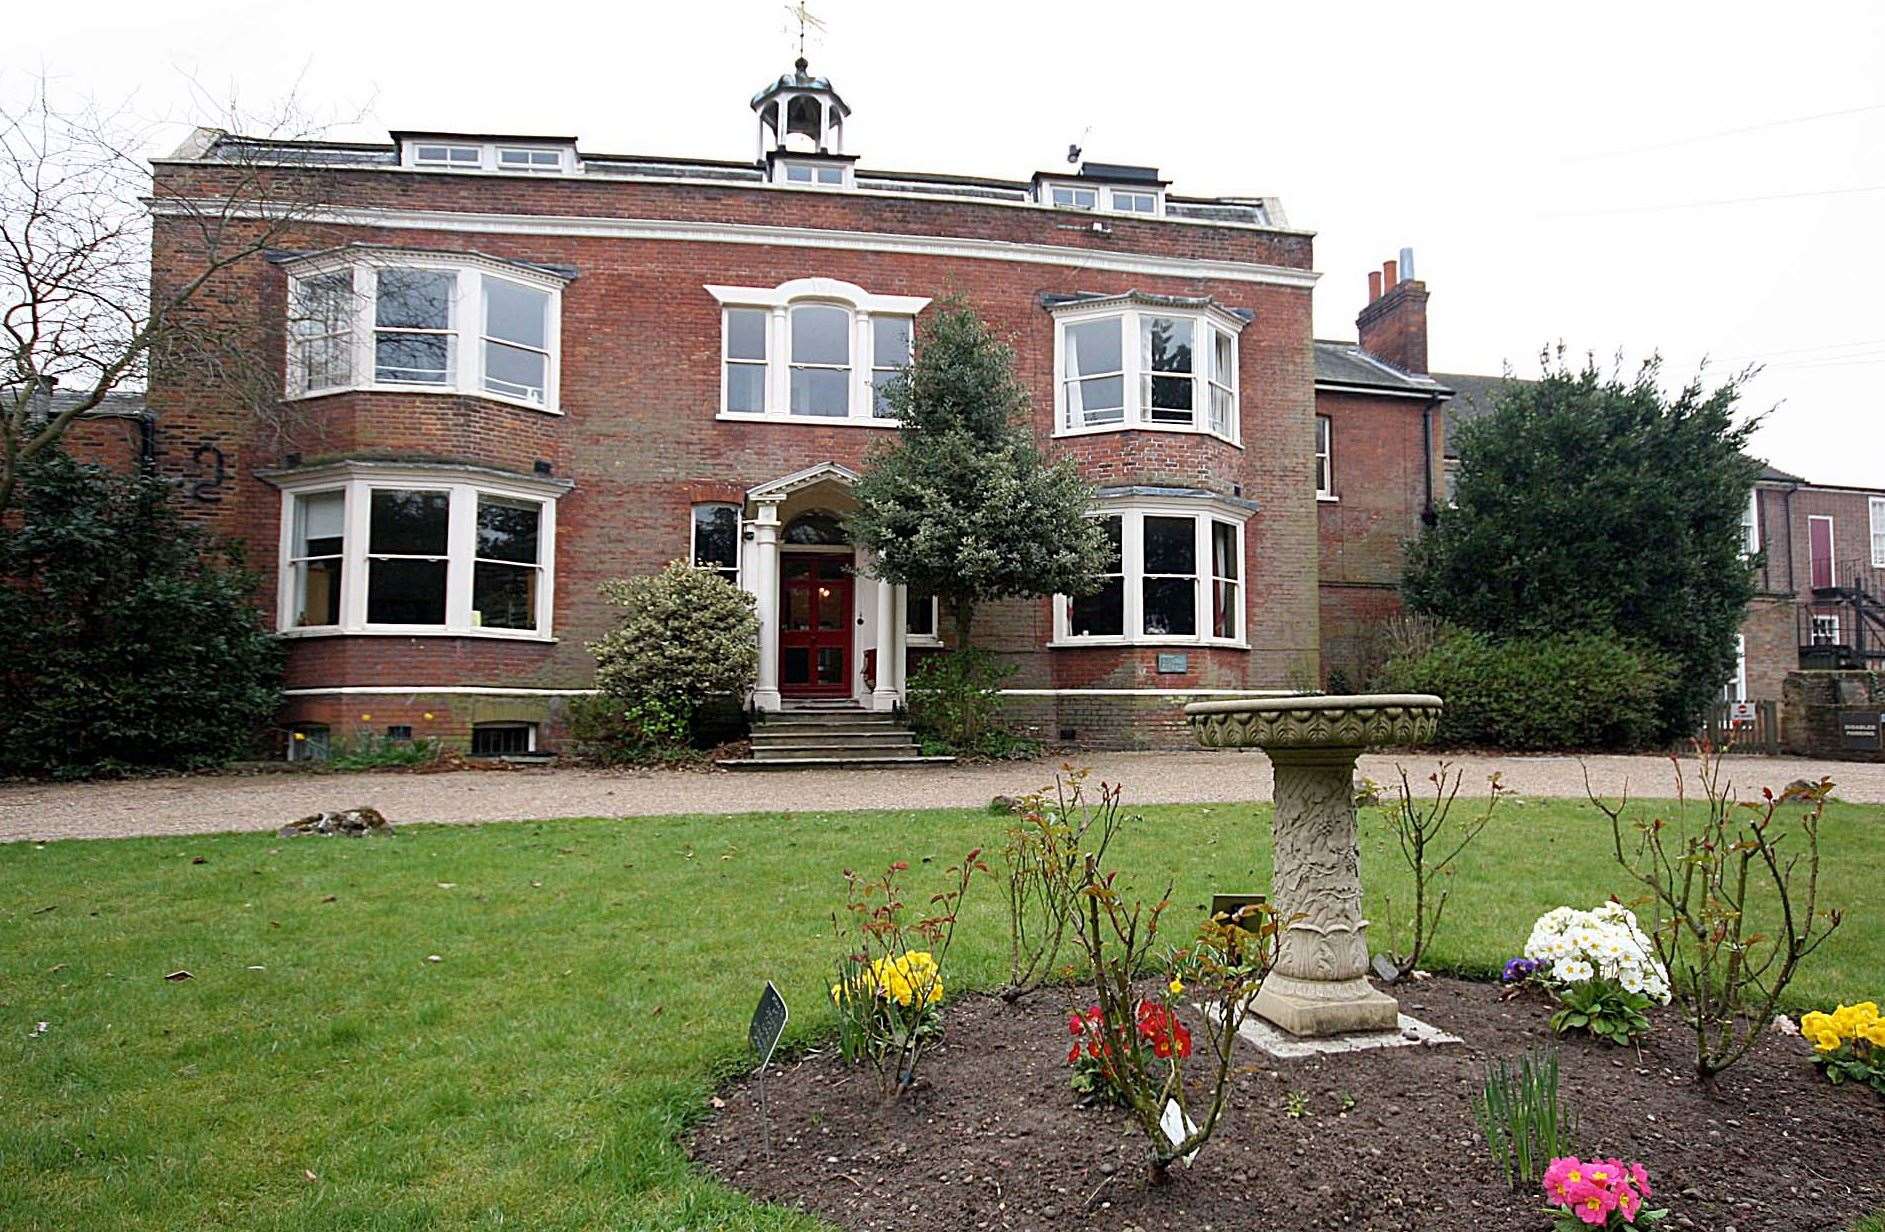 Gad’s Hill pupils continued to perform well in the Kent Test – the school buildings include Charles Dickens’ former home